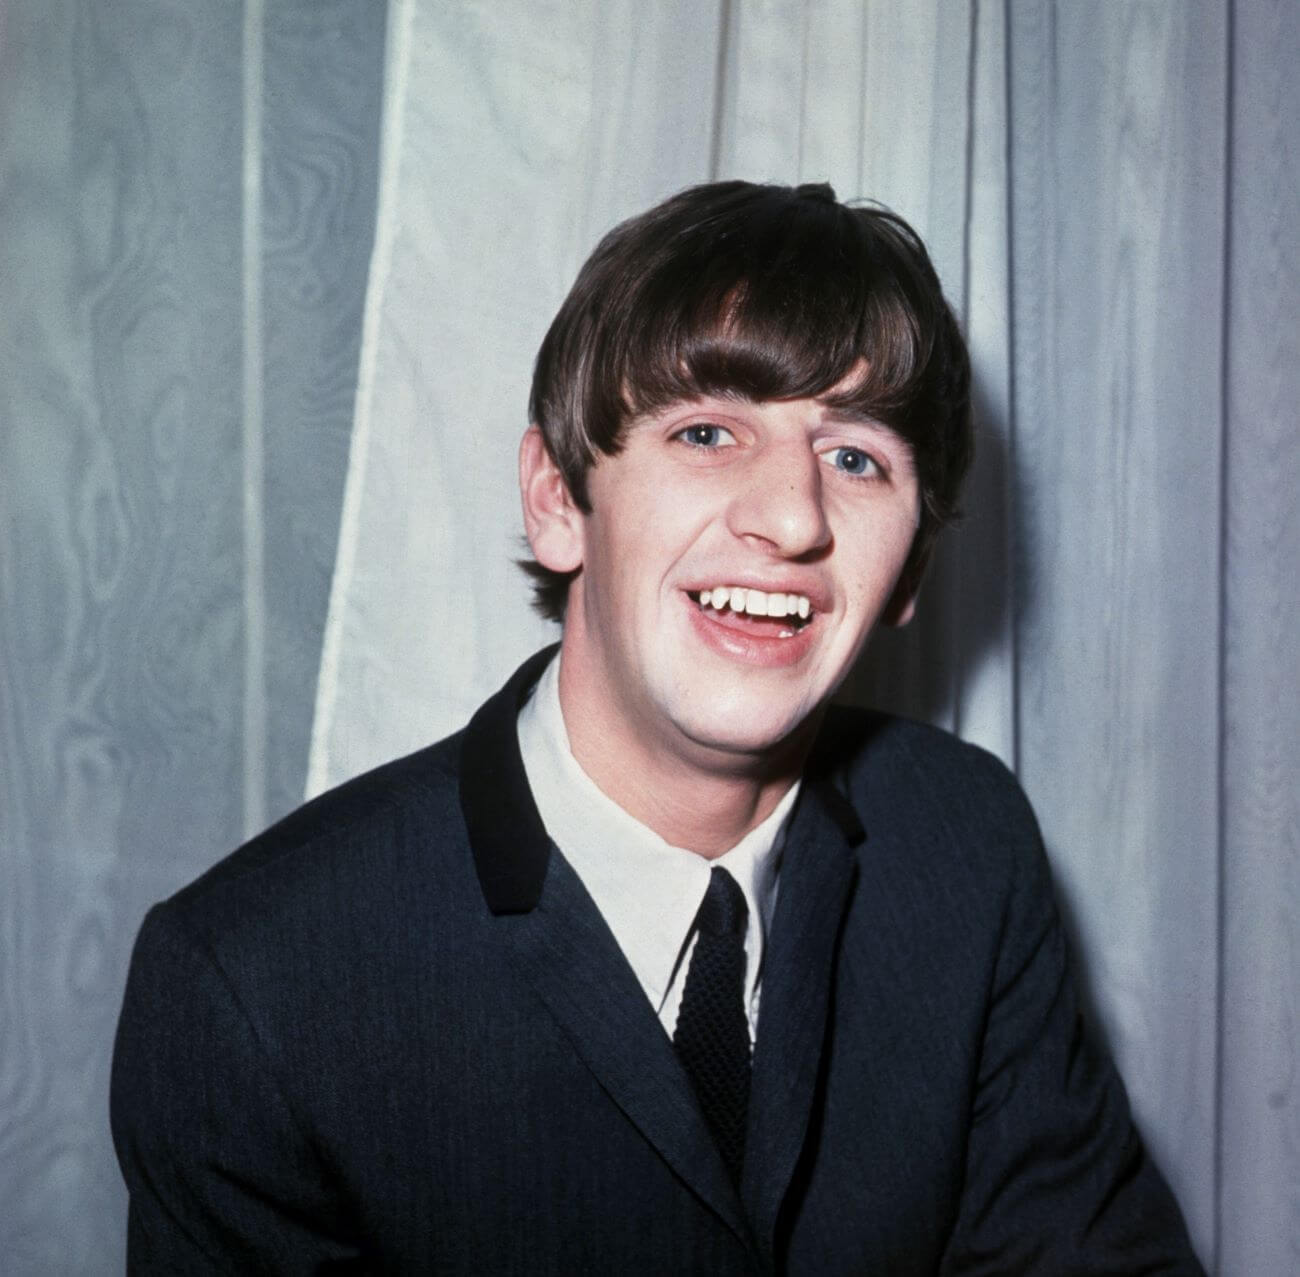 Ringo Starr wears a suit and poses in front of a curtain.